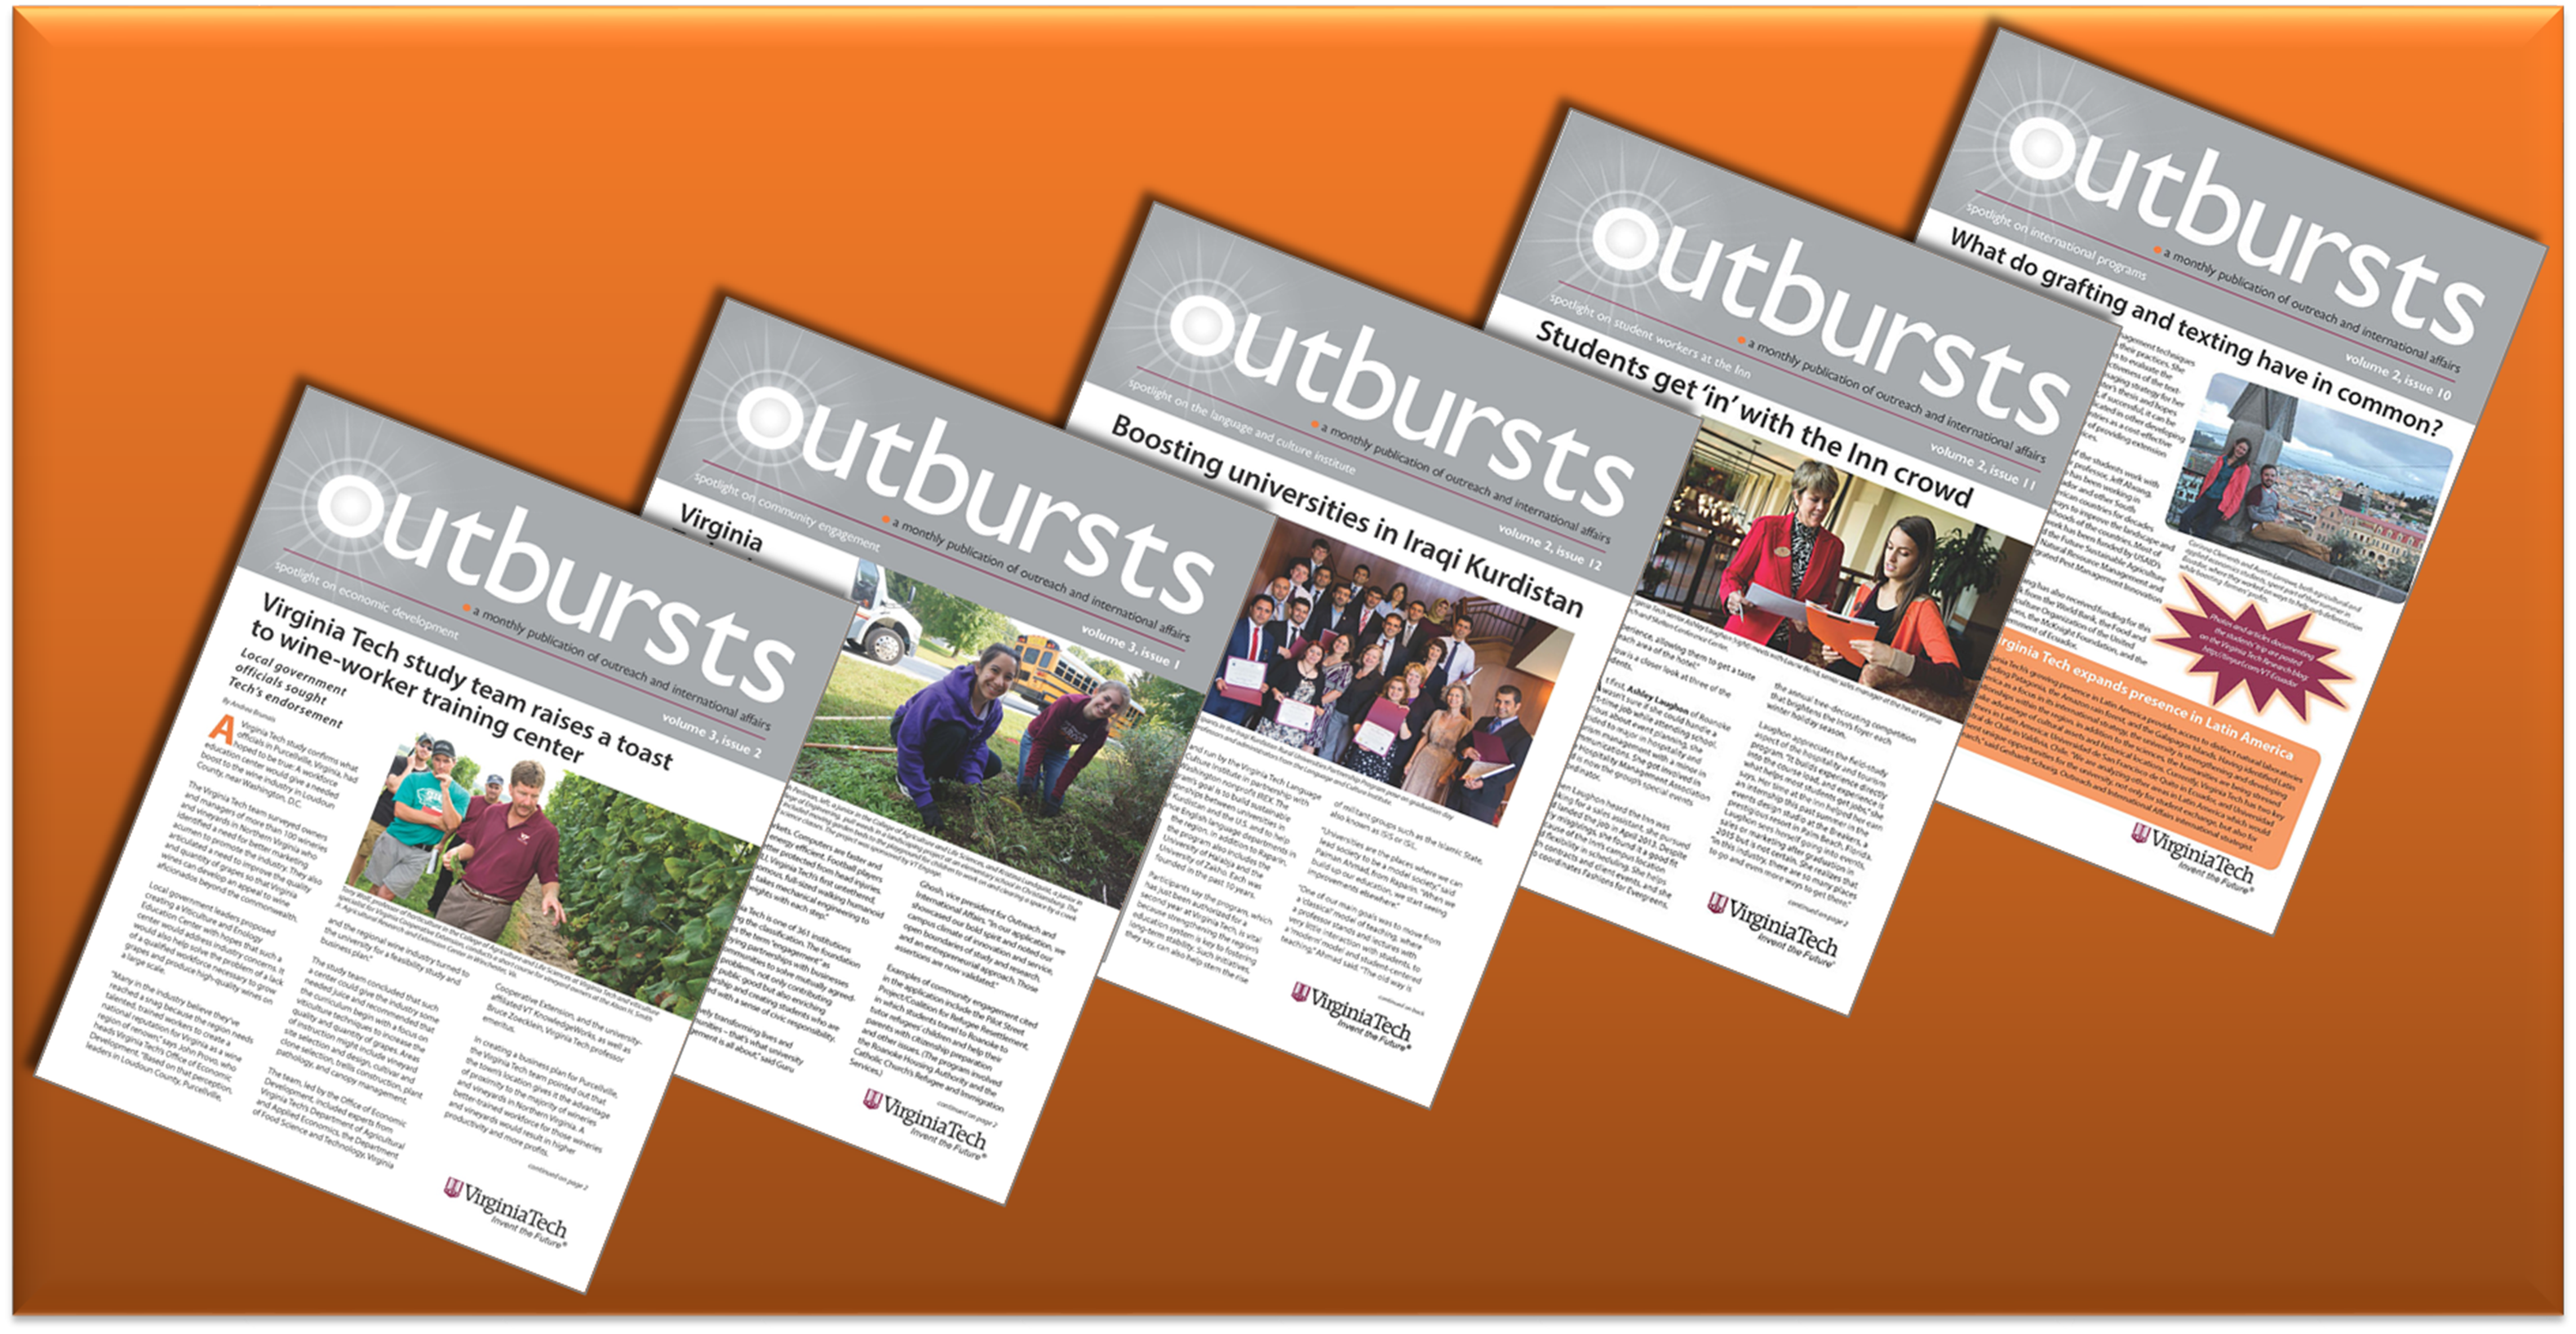 Outbursts fall-winter issues 2014-15